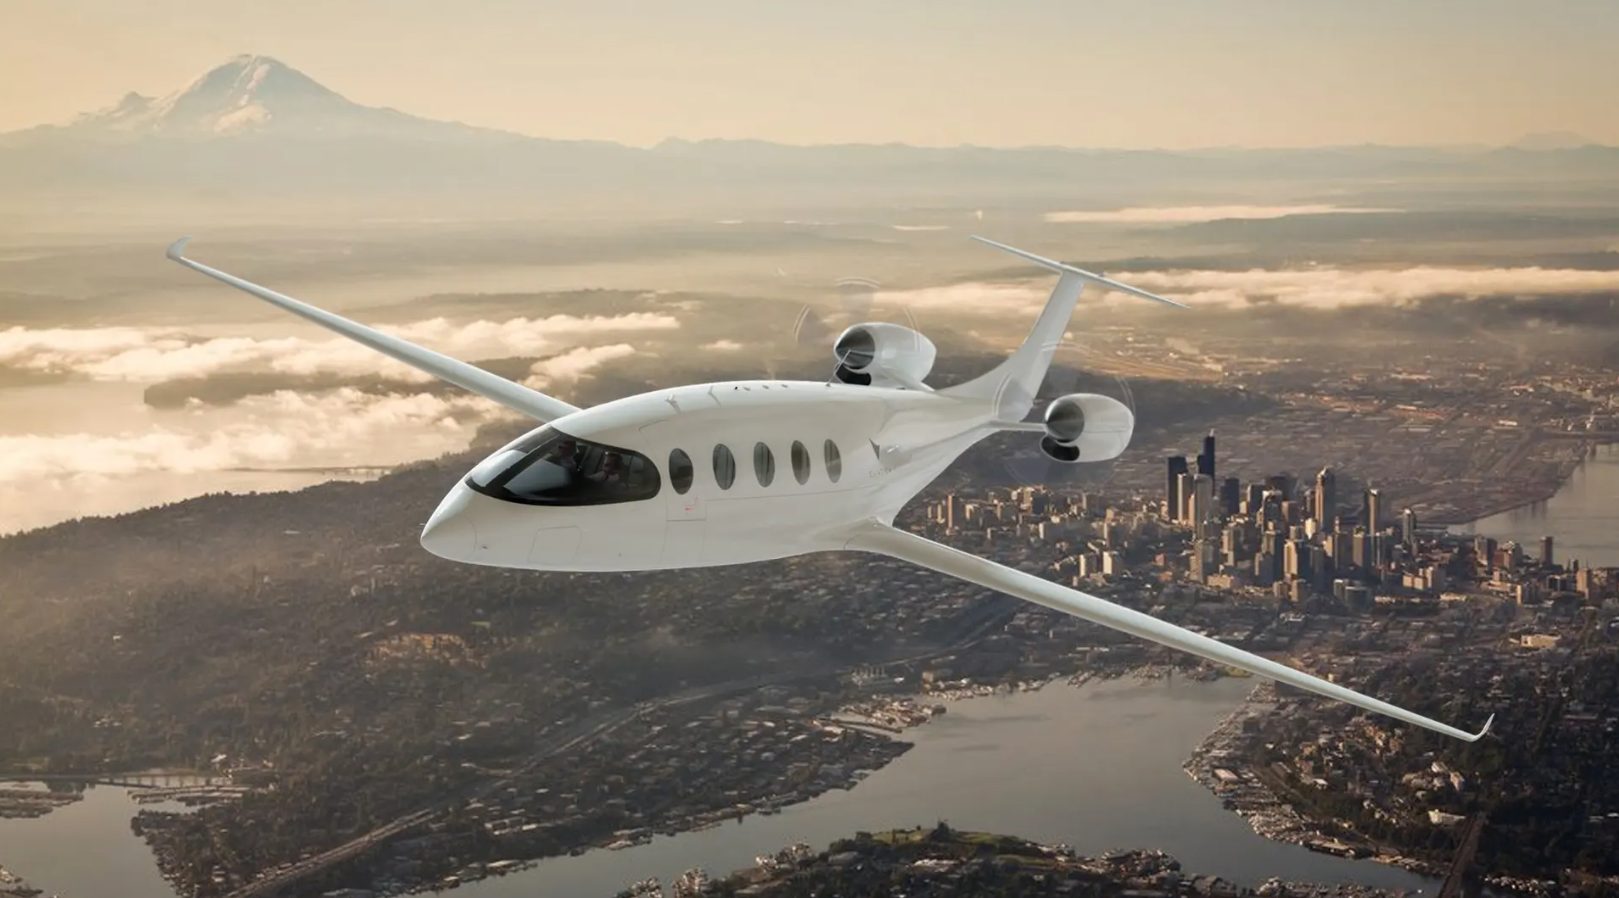 Air New Zealand has ordered 23 Alice electric planes with a range of 463 km